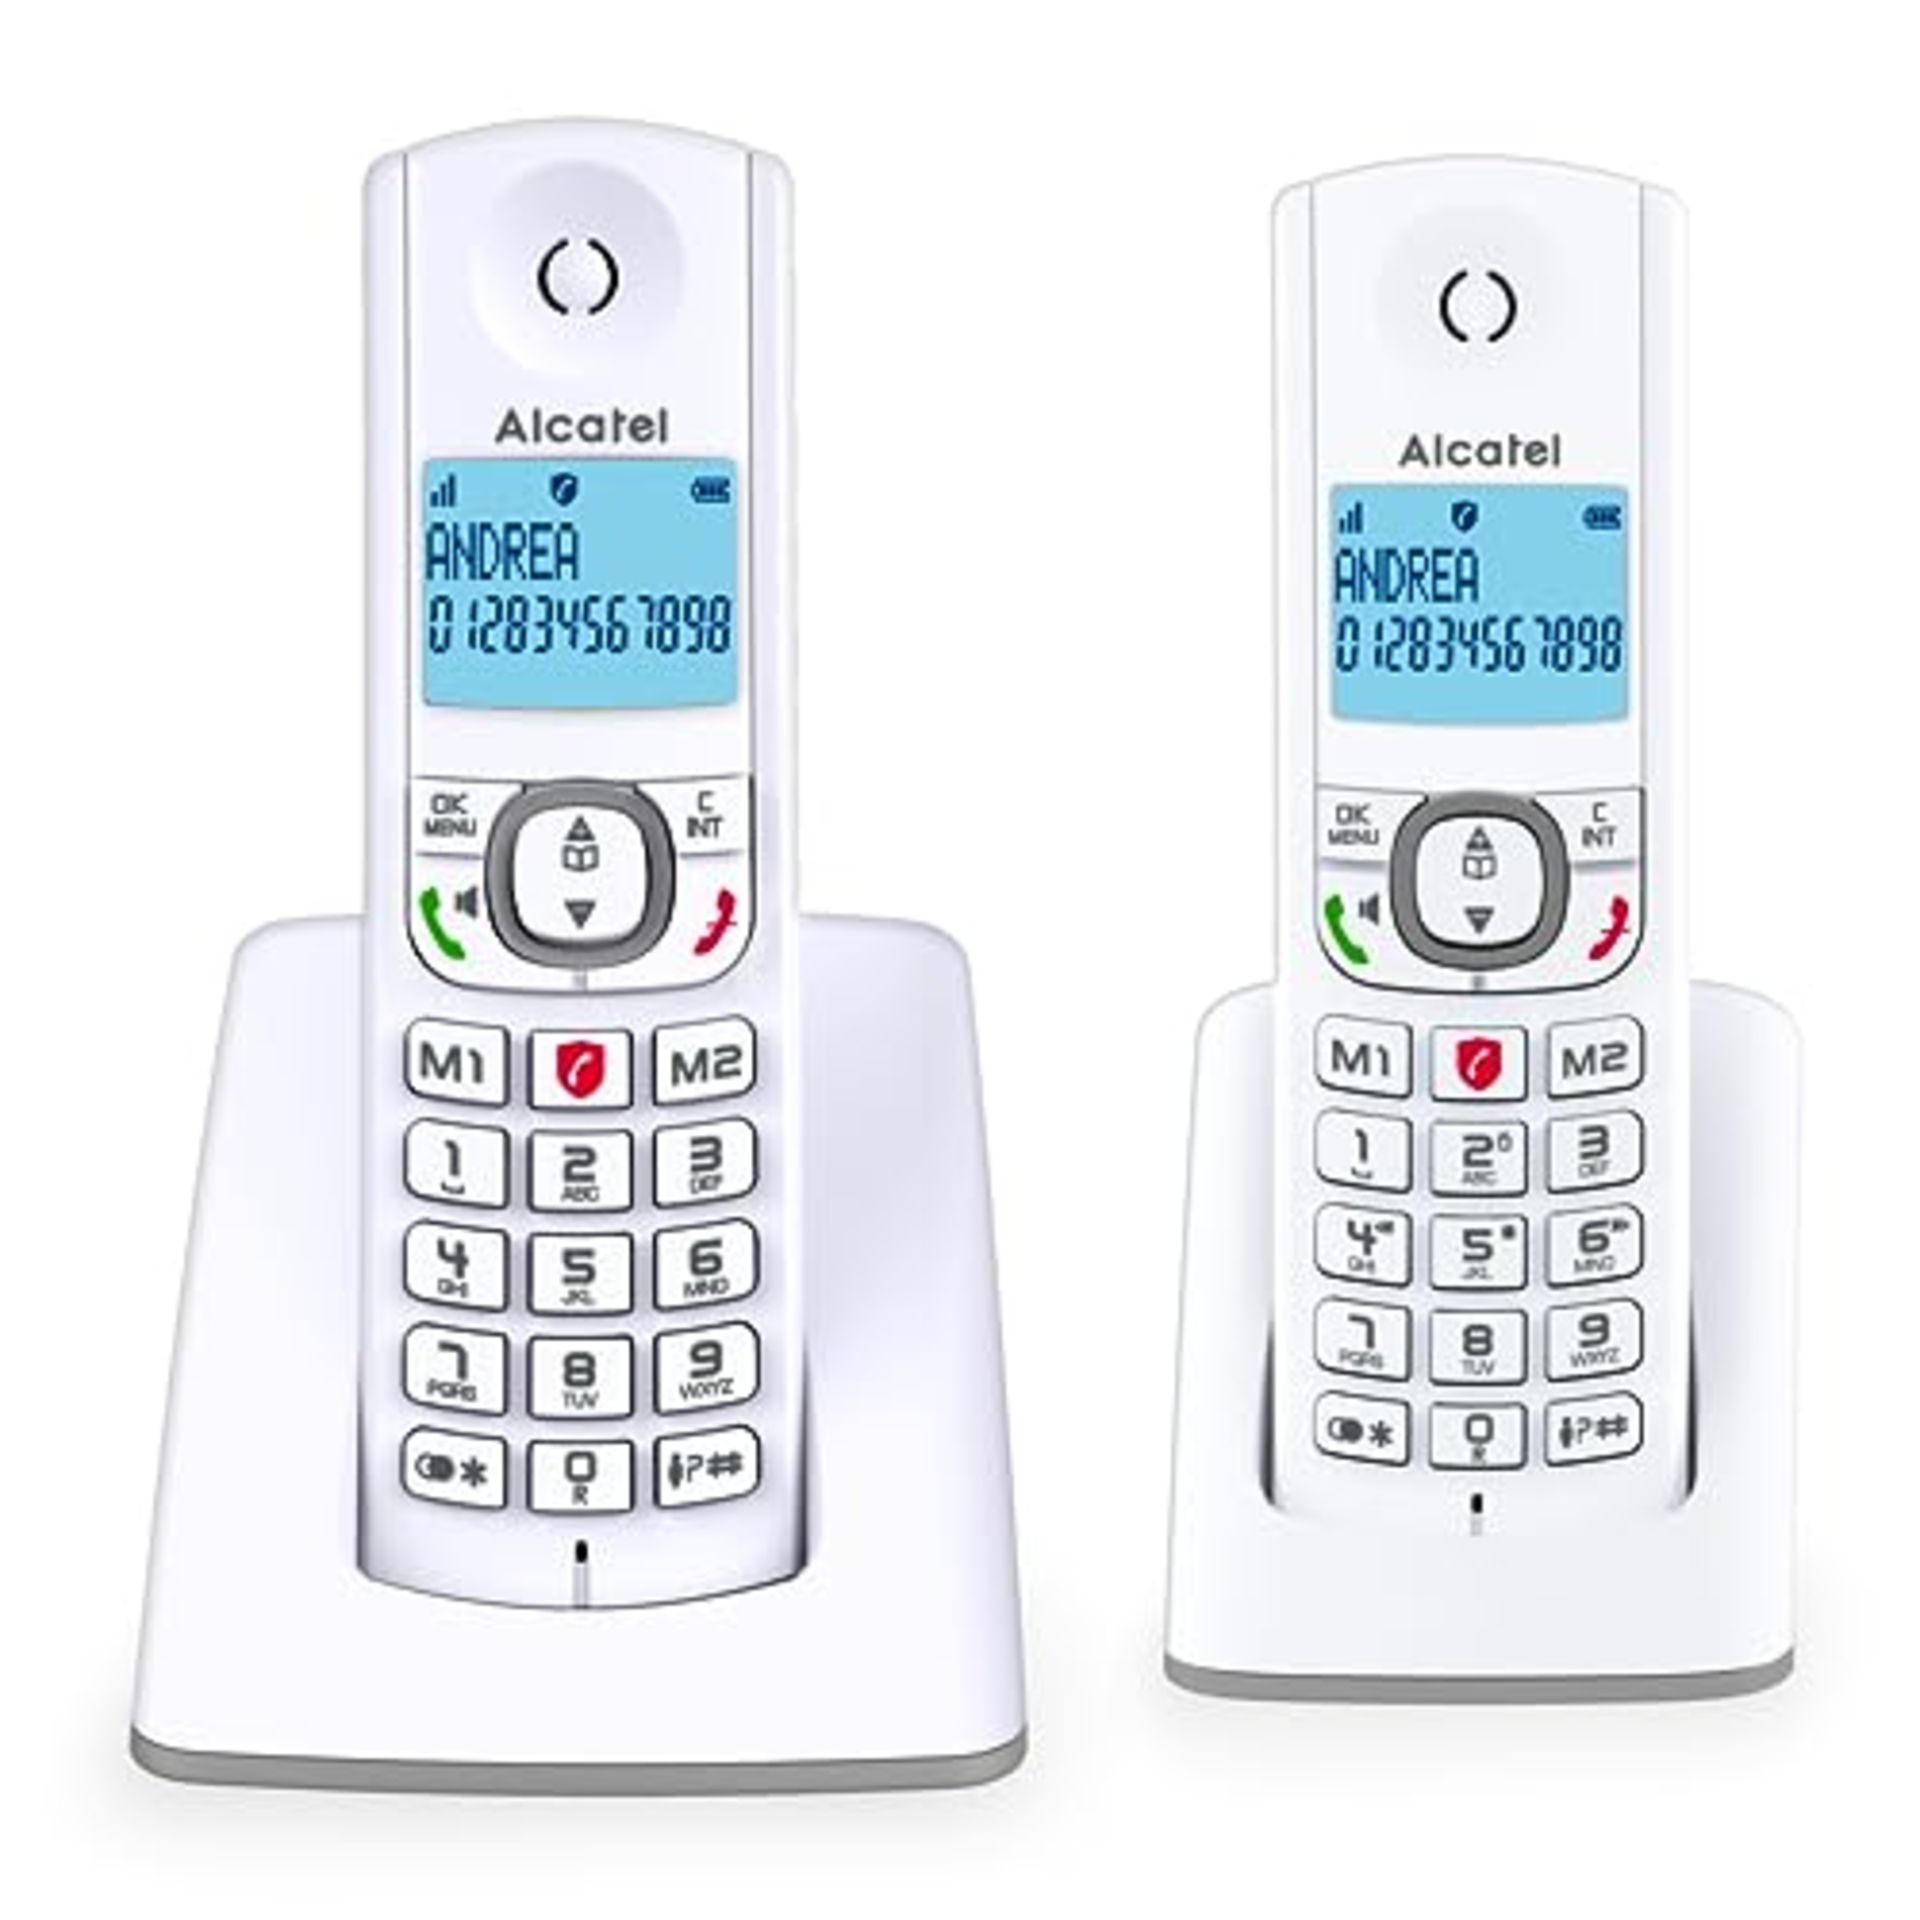 Alcatel F530 Duo, cordless phone with 2 handsets, call blocking, hands-free and two di